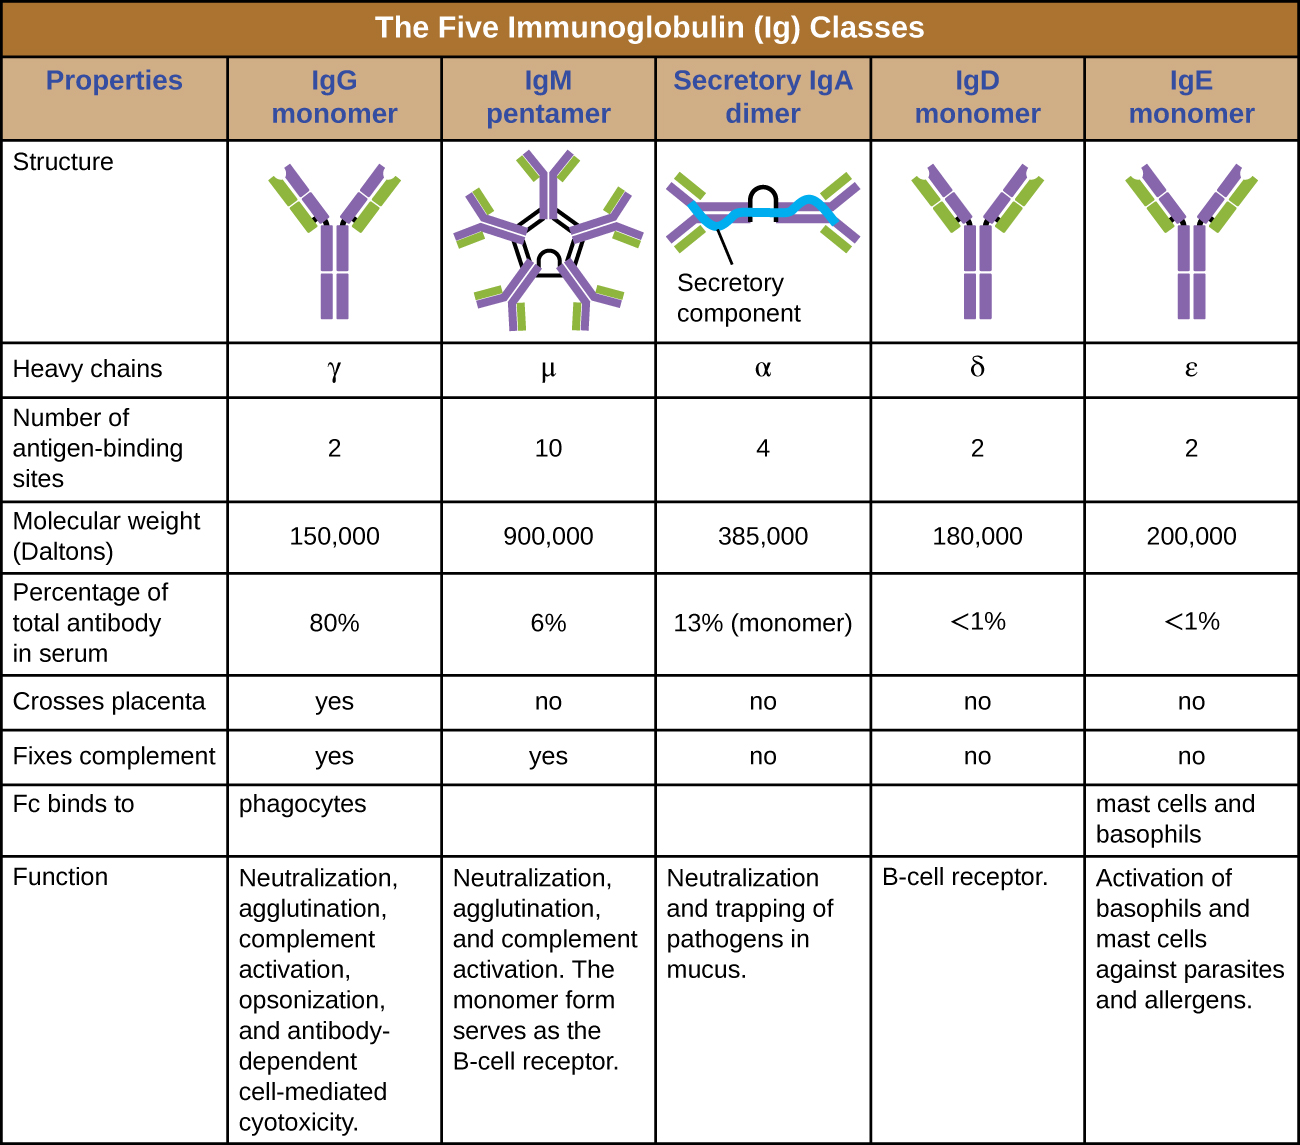 Table titled: The five immunoglobulin (Ig) classes. IgG monomer is a Y shaped molecule; the heavy chain is gamma, it has 2 antigen binding sites and a molecular weight of 150,000 daltons. It makes up 80% of the total antibodies in the serum. It crosses the placenta and fixes compliments and the Fc binds to phagocytes. It’s functions are: Neutralization, agglutination, complement activation, opsonization, and antibody-dependent cell-mediated cytotoxicity. IgM pentamer is 5 Y’s bound at their bases; the heavy chain is mu, it has 10 antigen binding sites and a molecular weight of 900,000 daltons. It makes up 6% of the total antibodies in the serum. It does not cross the placenta but does fix compliments and the Fc does not bind to a particular cell type. It’s functions are: Neutralization, agglutination, and complement activation. The monomer form serves as the B cell receptor. IgA dimer is 2 Y’s bound at their bases; the heavy chain is alpha, it has 4 antigen binding sites and a molecular weight of 385,000 daltons. It makes up 13% of the total antibodies in the serum. It does not cross the placenta nor fix compliments and the Fc does not bind to a particular cell type. It’s functions are: Neutralization and trapping of pathogens in mucus. IgD monomer is 1 Y; the heavy chain is delta, it has 2 antigen binding sites and a molecular weight of 180,000 daltons. It makes up <1% of the total antibodies in the serum. It does not cross the placenta nor fix compliments and the Fc does not bind to a particular cell type. It’s functions are: B cell receptors. IgE monomer is 1 Y; the heavy chain is epsilon, it has 2 antigen binding sites and a molecular weight of 200,000 daltons. It makes up <1% of the total antibodies in the serum. It does not cross the placenta nor fix compliments. The Fc binds to mast cells and basophils. It’s functions are: Activation of basophils and mast cells against parasites and allergens.